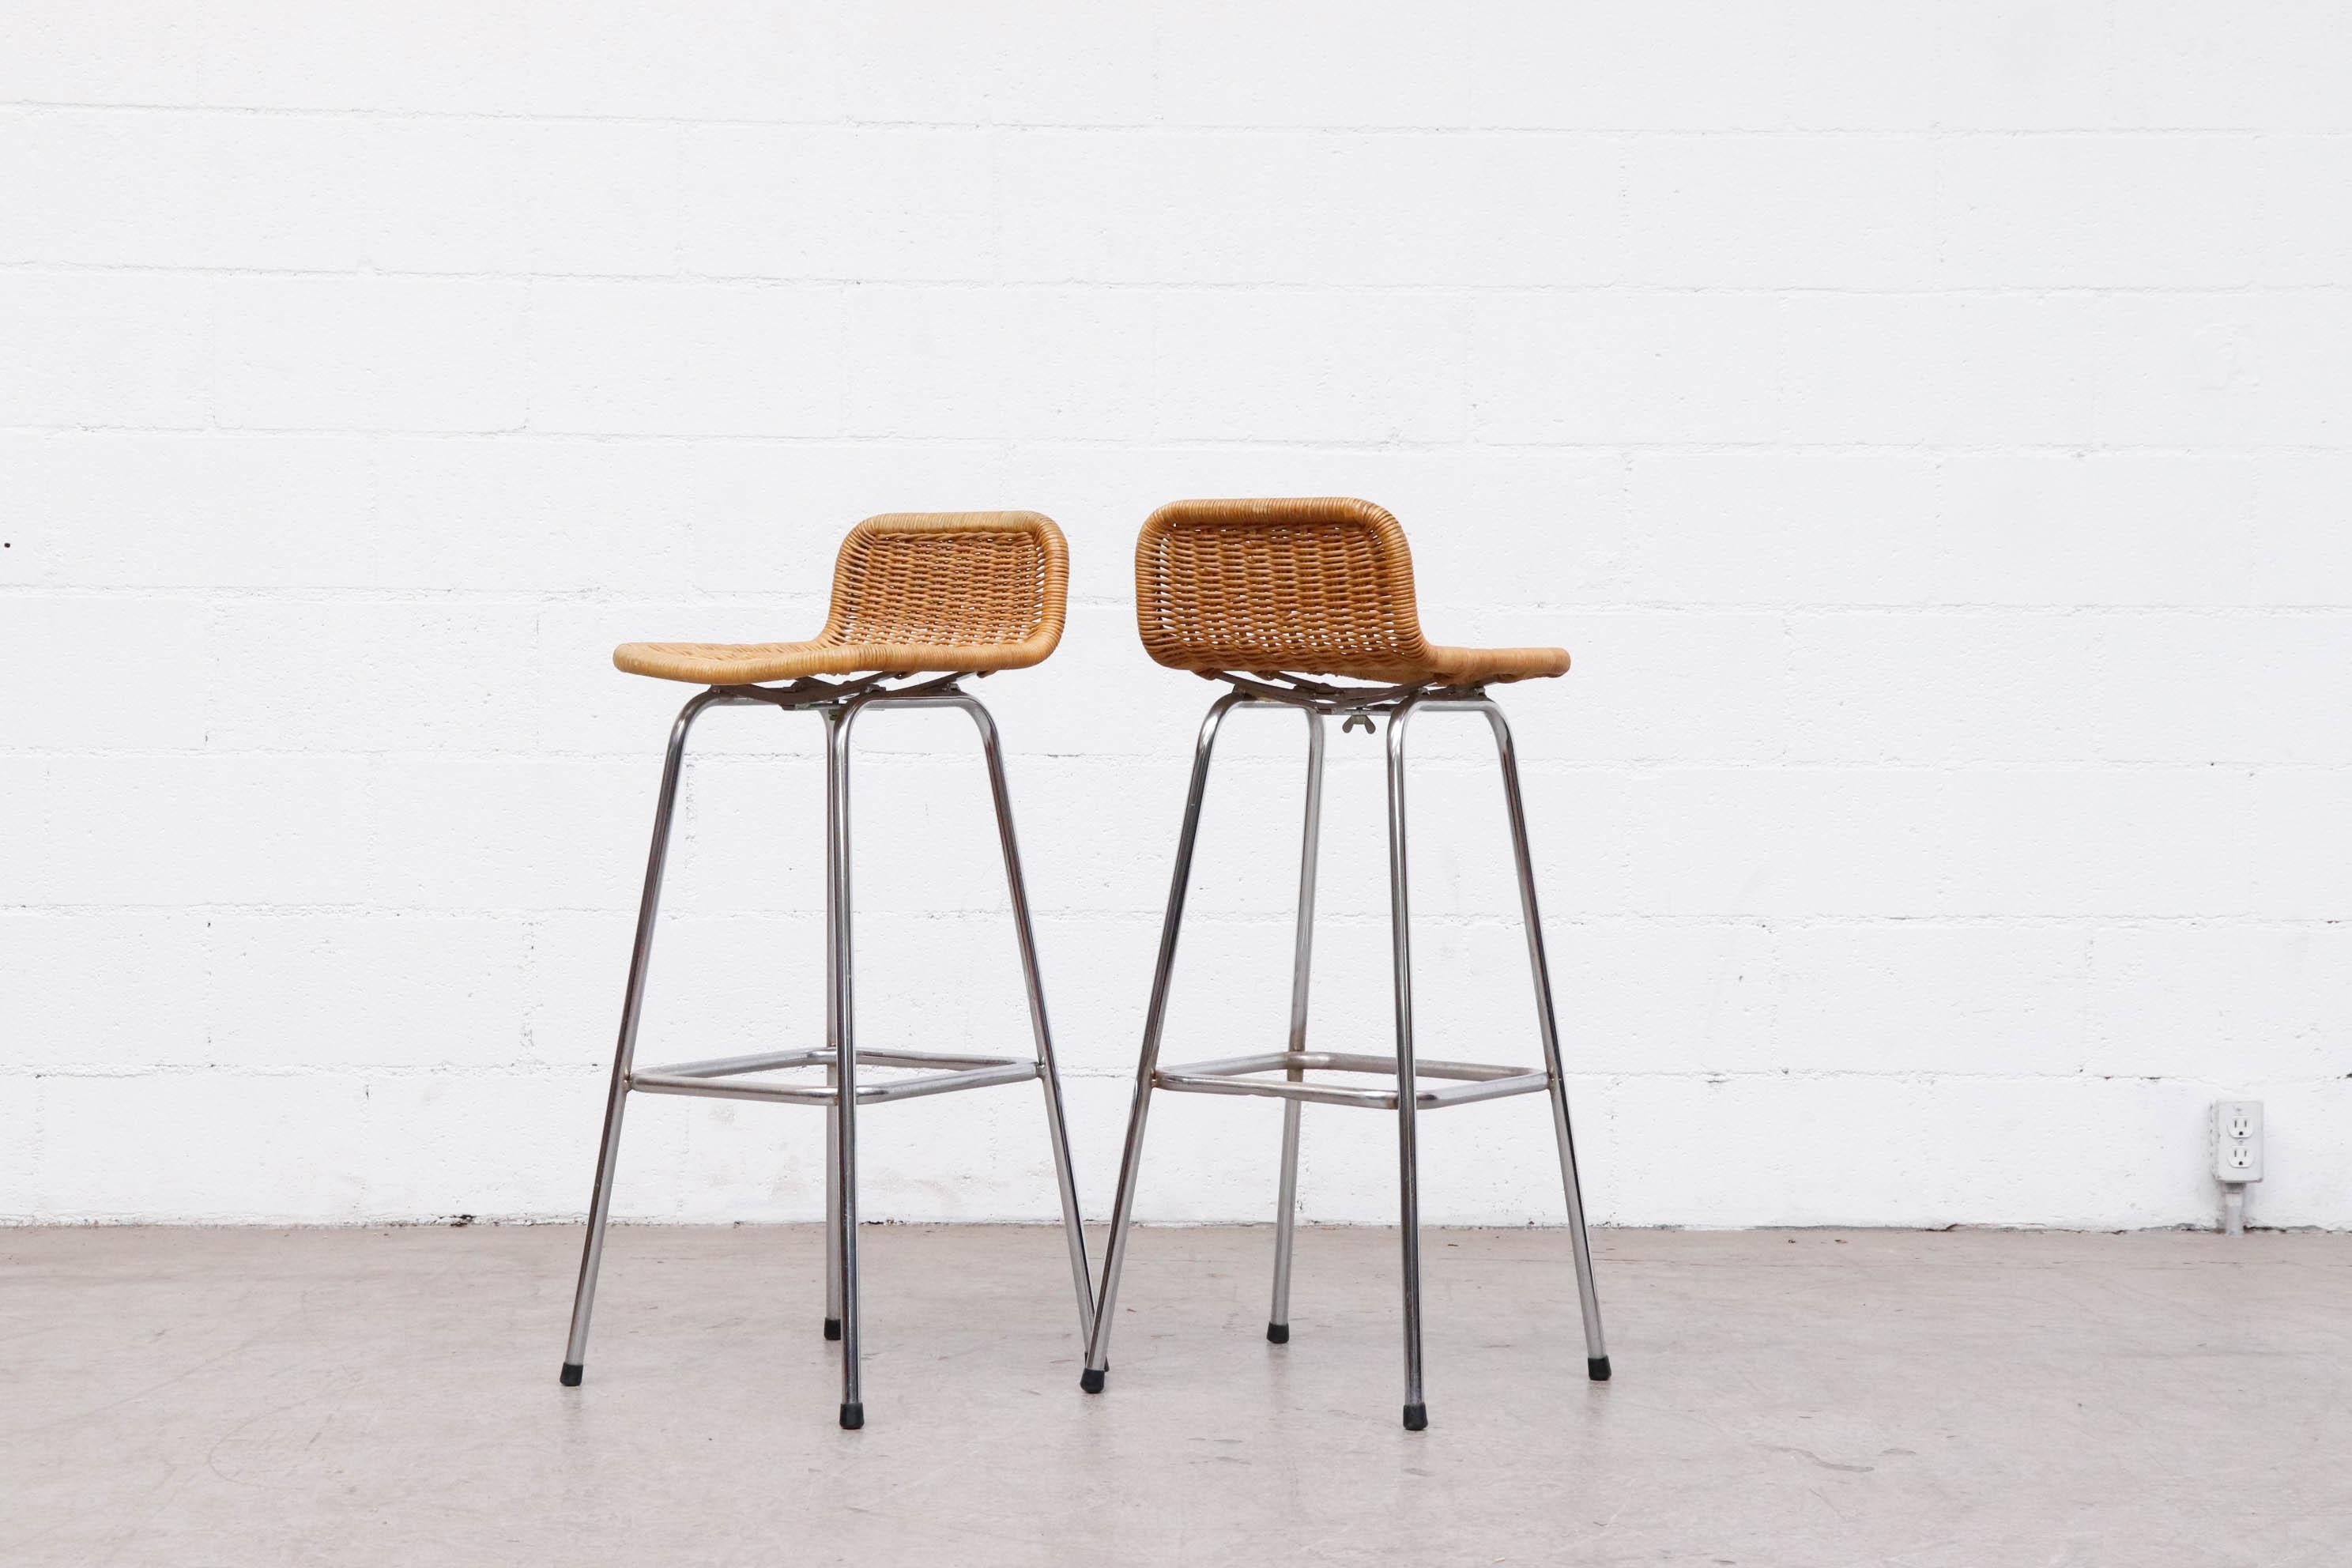 Pair of Charlotte Perriand style bar stools by Dirk van Sliedregt for Rohe Noordwolde with low Rounded Rattan seat backs, Chrome Tubular frames and bolted down seats. In original condition with visible wear and patina, consistent with age and use.